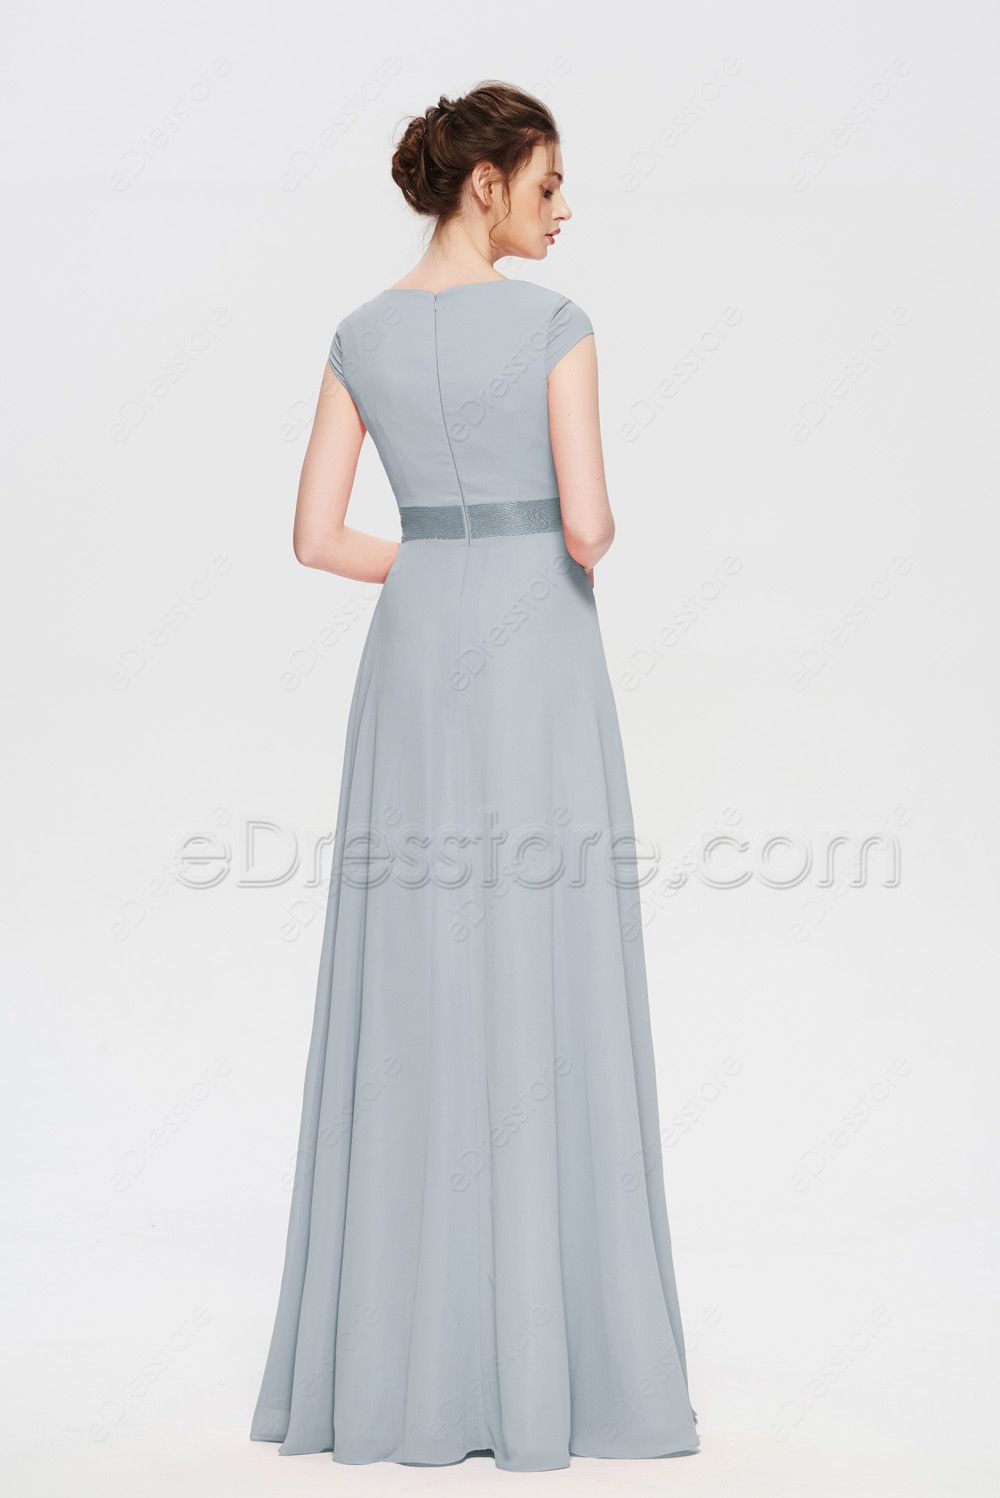 Modest Dusty Blue Prom Dresses Long with Cap Sleeves | eDresstore